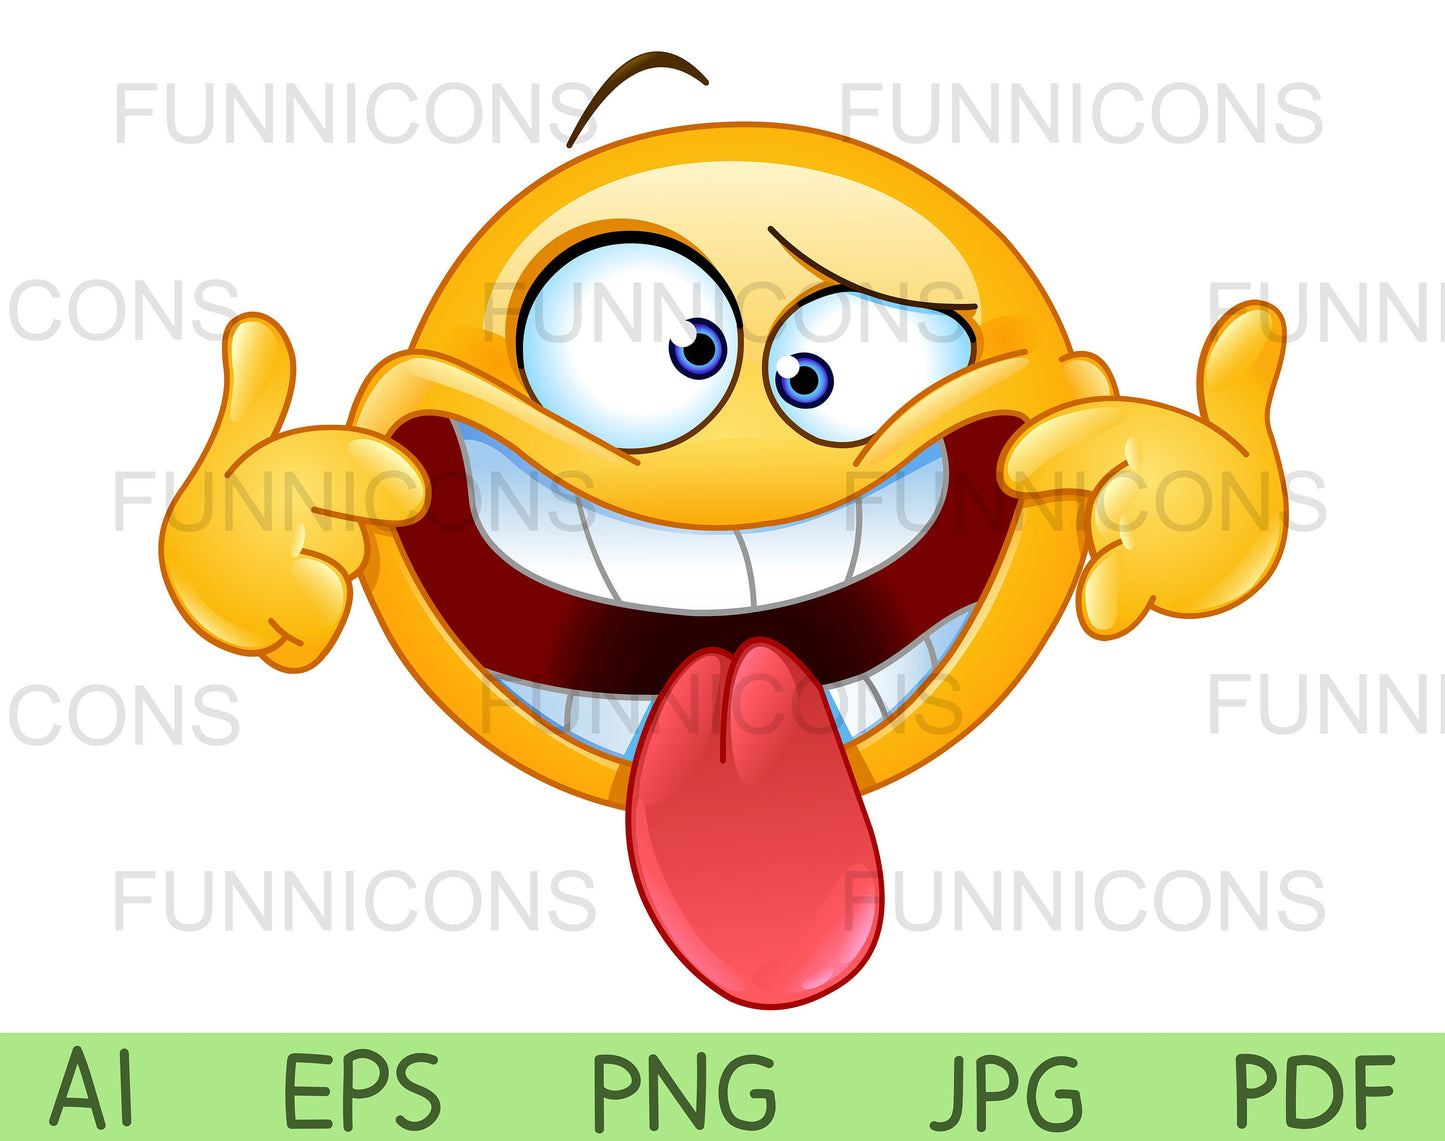 Silly Emoji Pulling his Lips Back and Sticking his Tongue out to Make a Funny Face